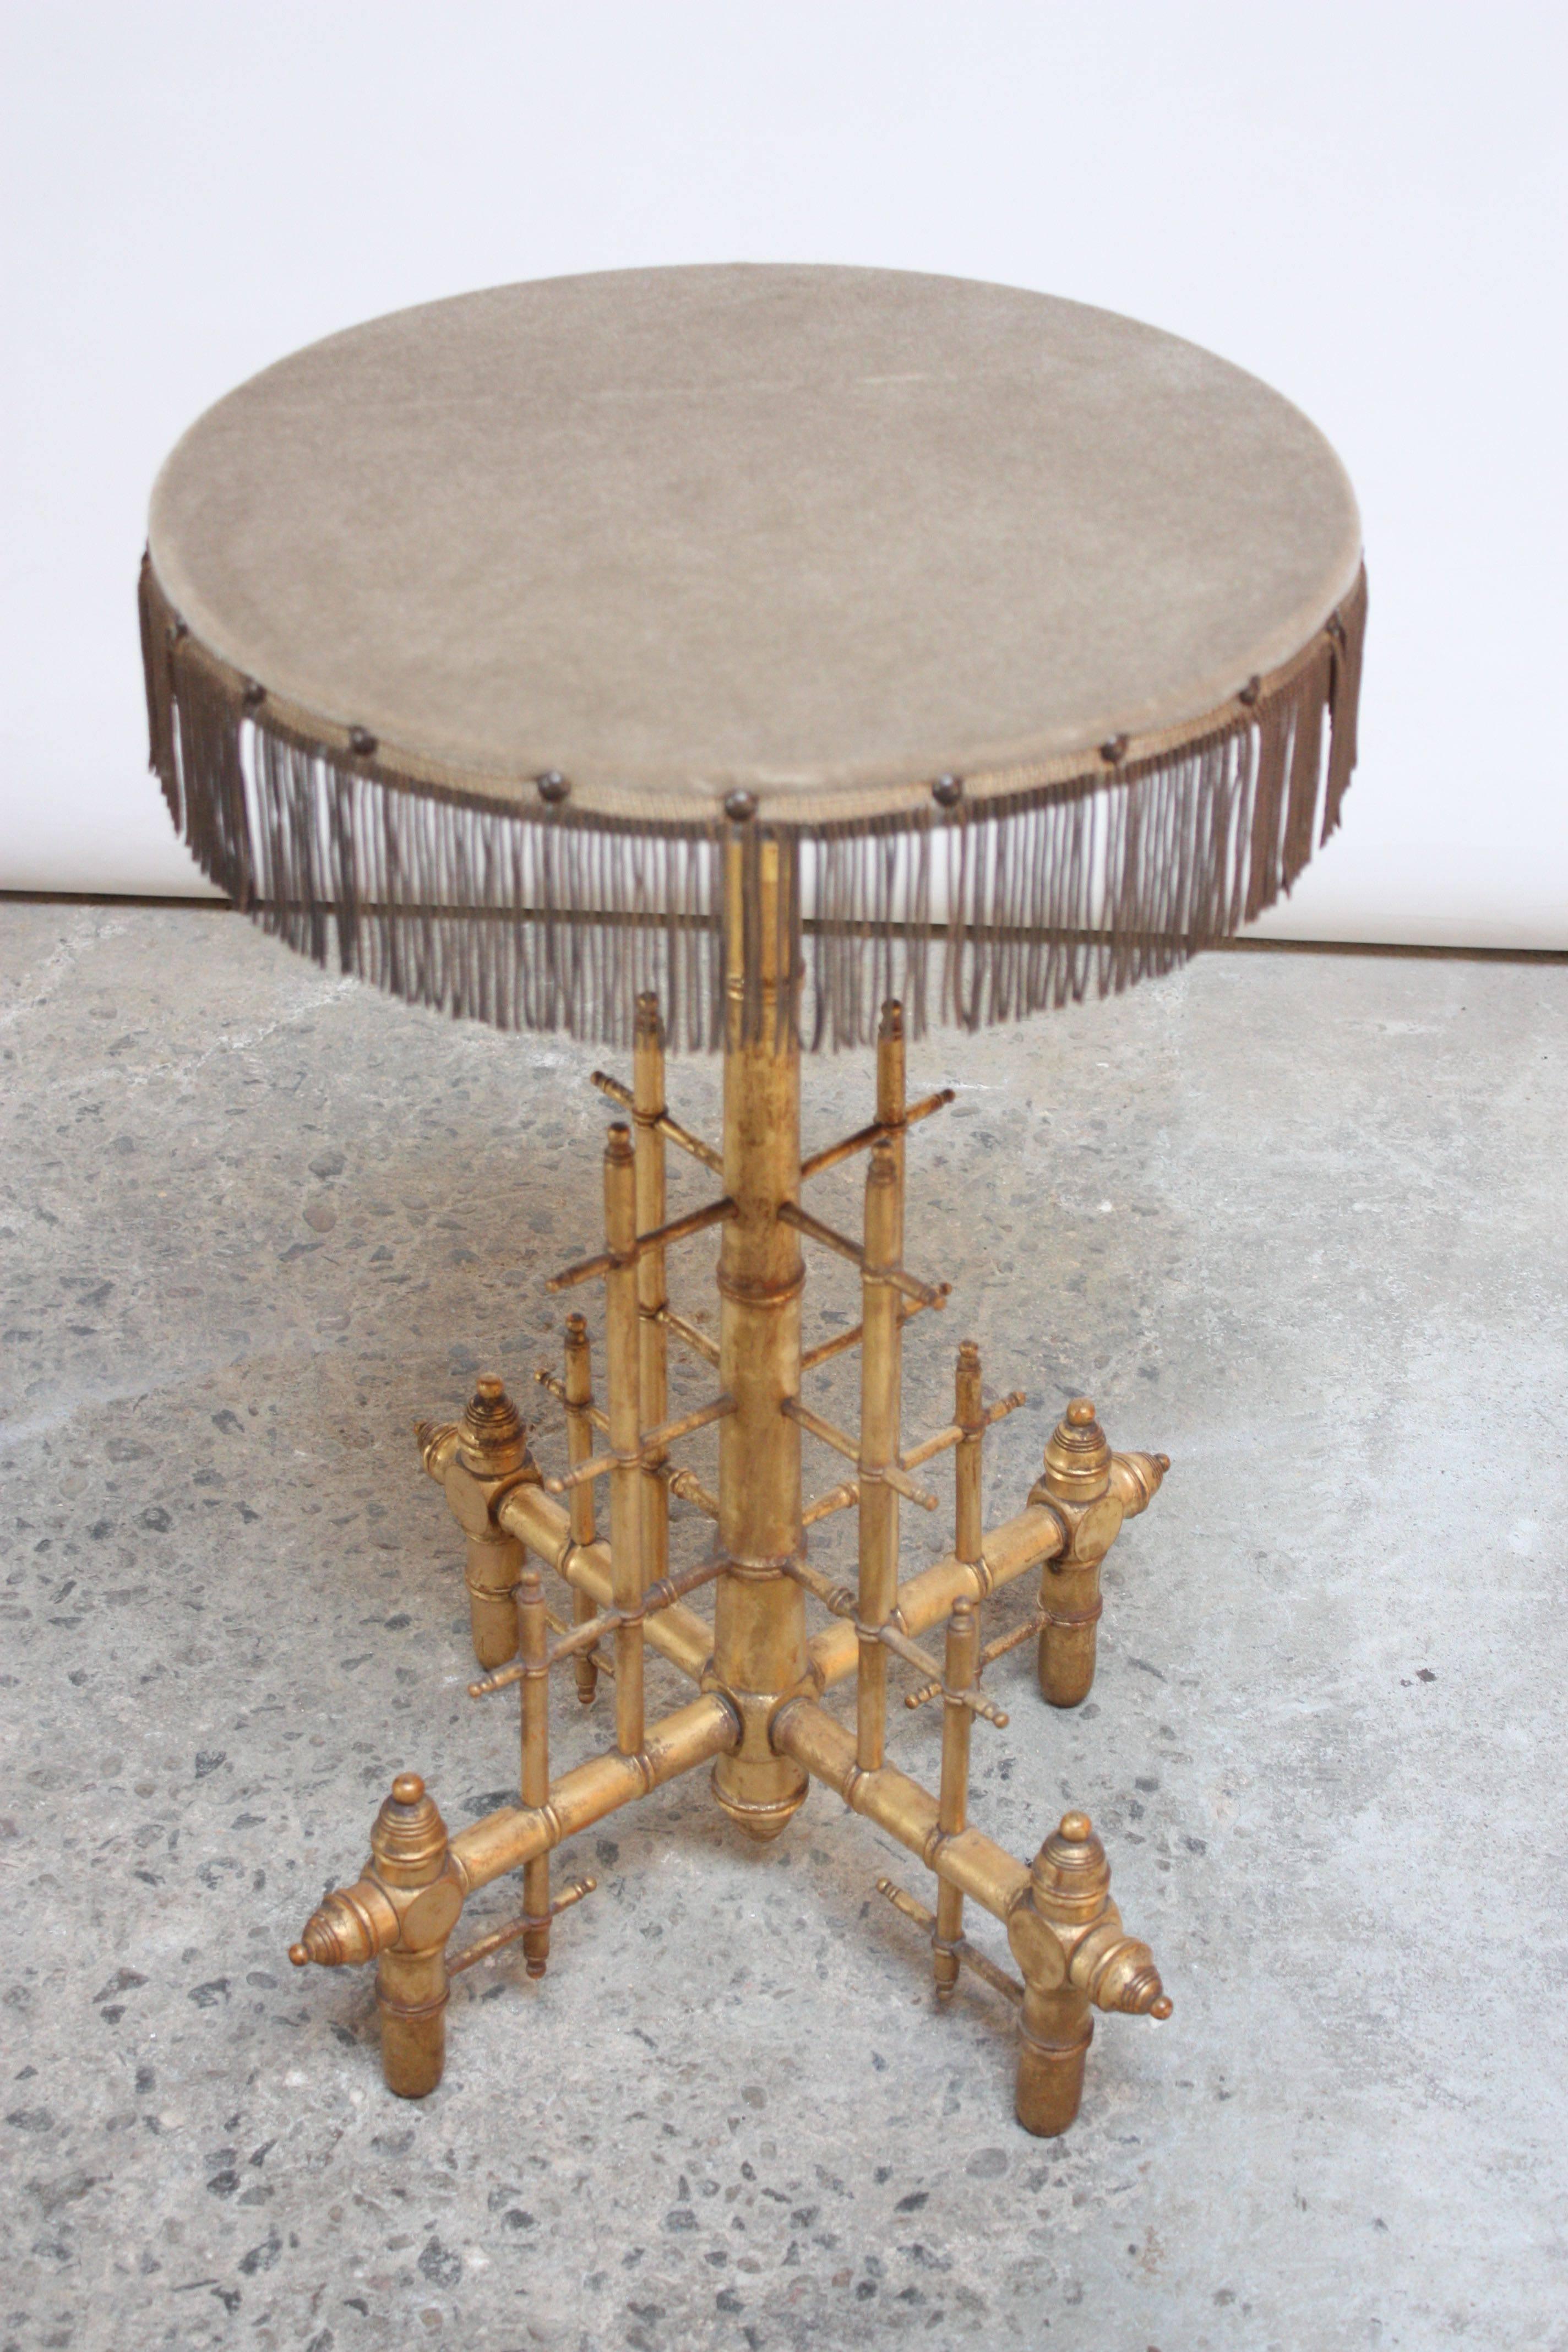 Unique and whimsical drum table comprised of a gilded wooden base depicting pipes and fittings. The original textile was replaced however it retains the original tassels and upholstery tacks.
 